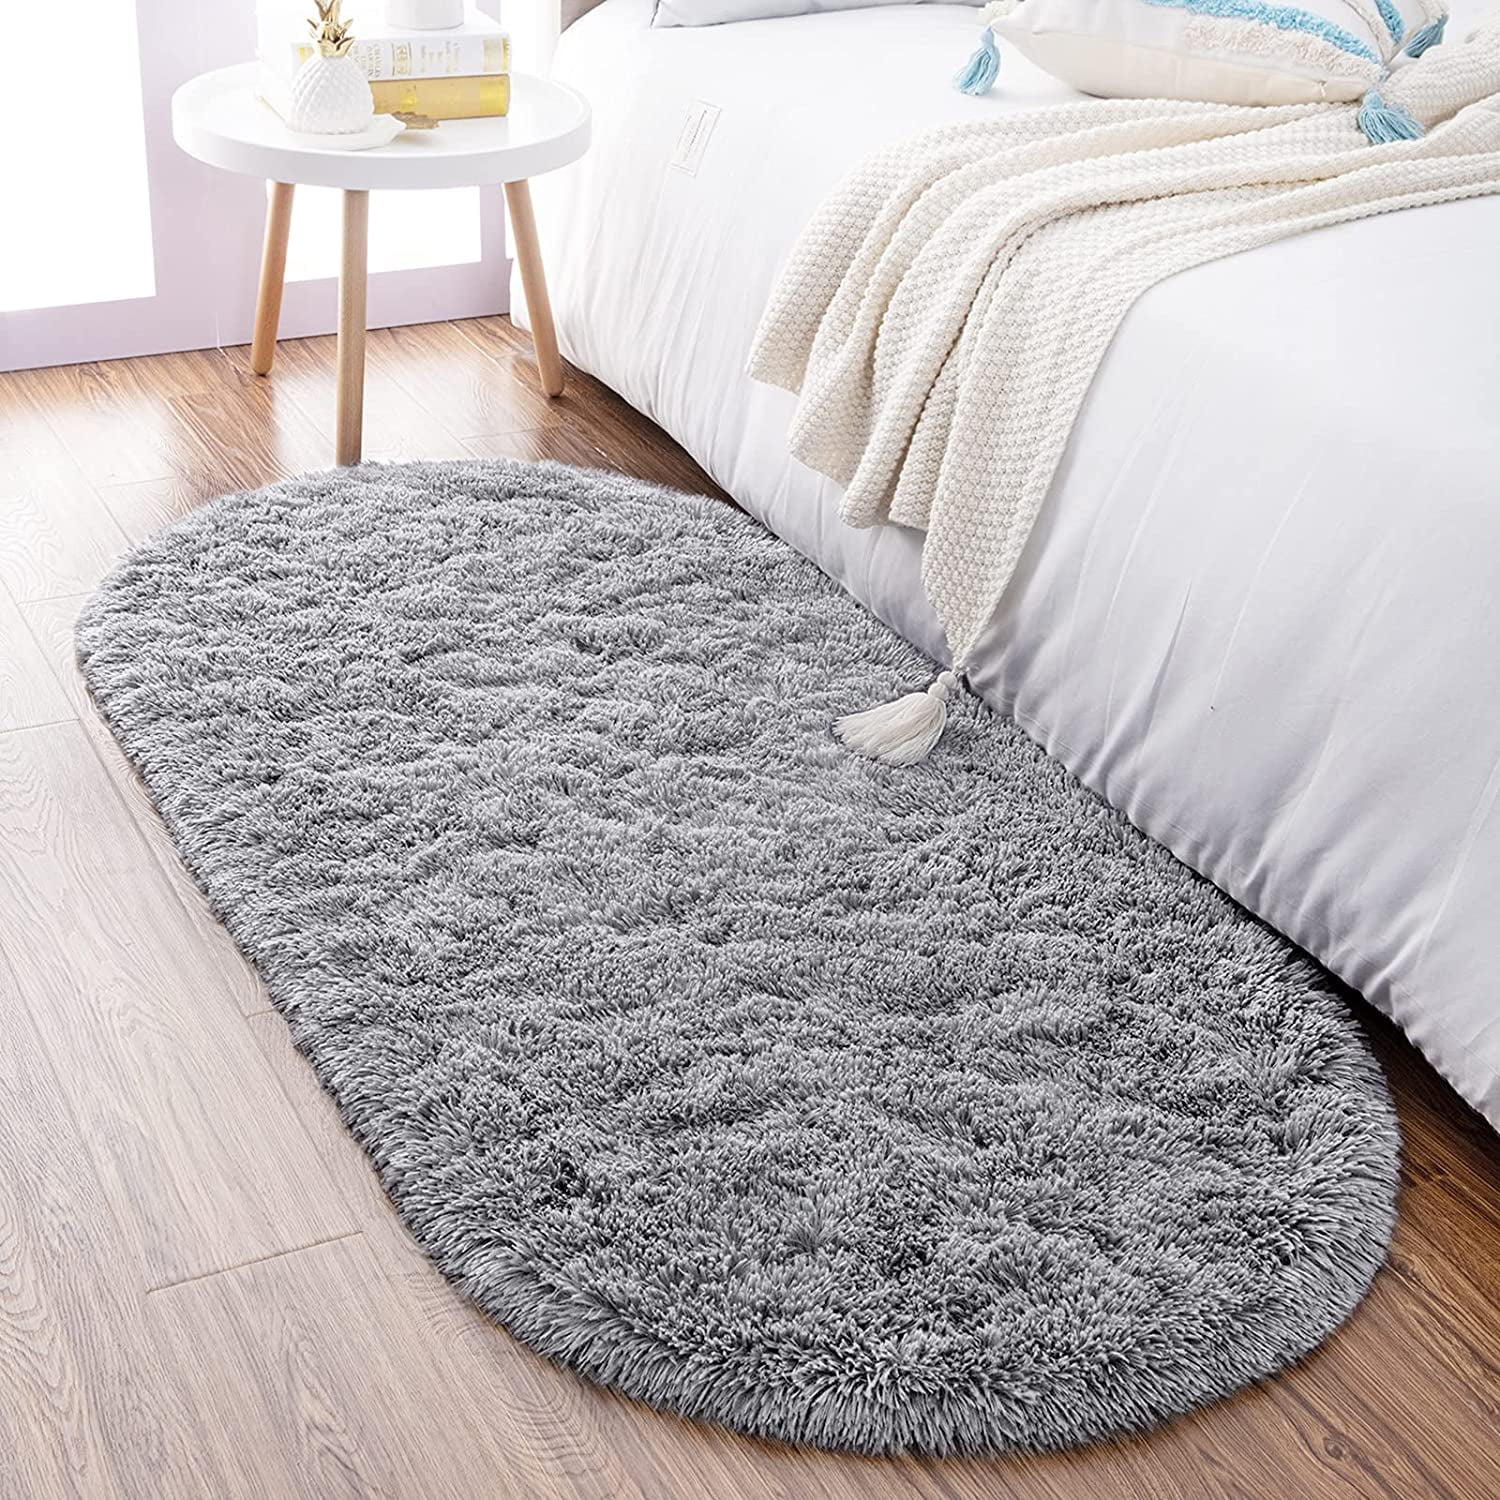 Color G Bedside Rugs for Bedroom Soft and Comfortable, Bedroom Runner Rug  for Home Decor Aesthetic, 1.7'x3.9' Grey Area Rug Washable Carpet for